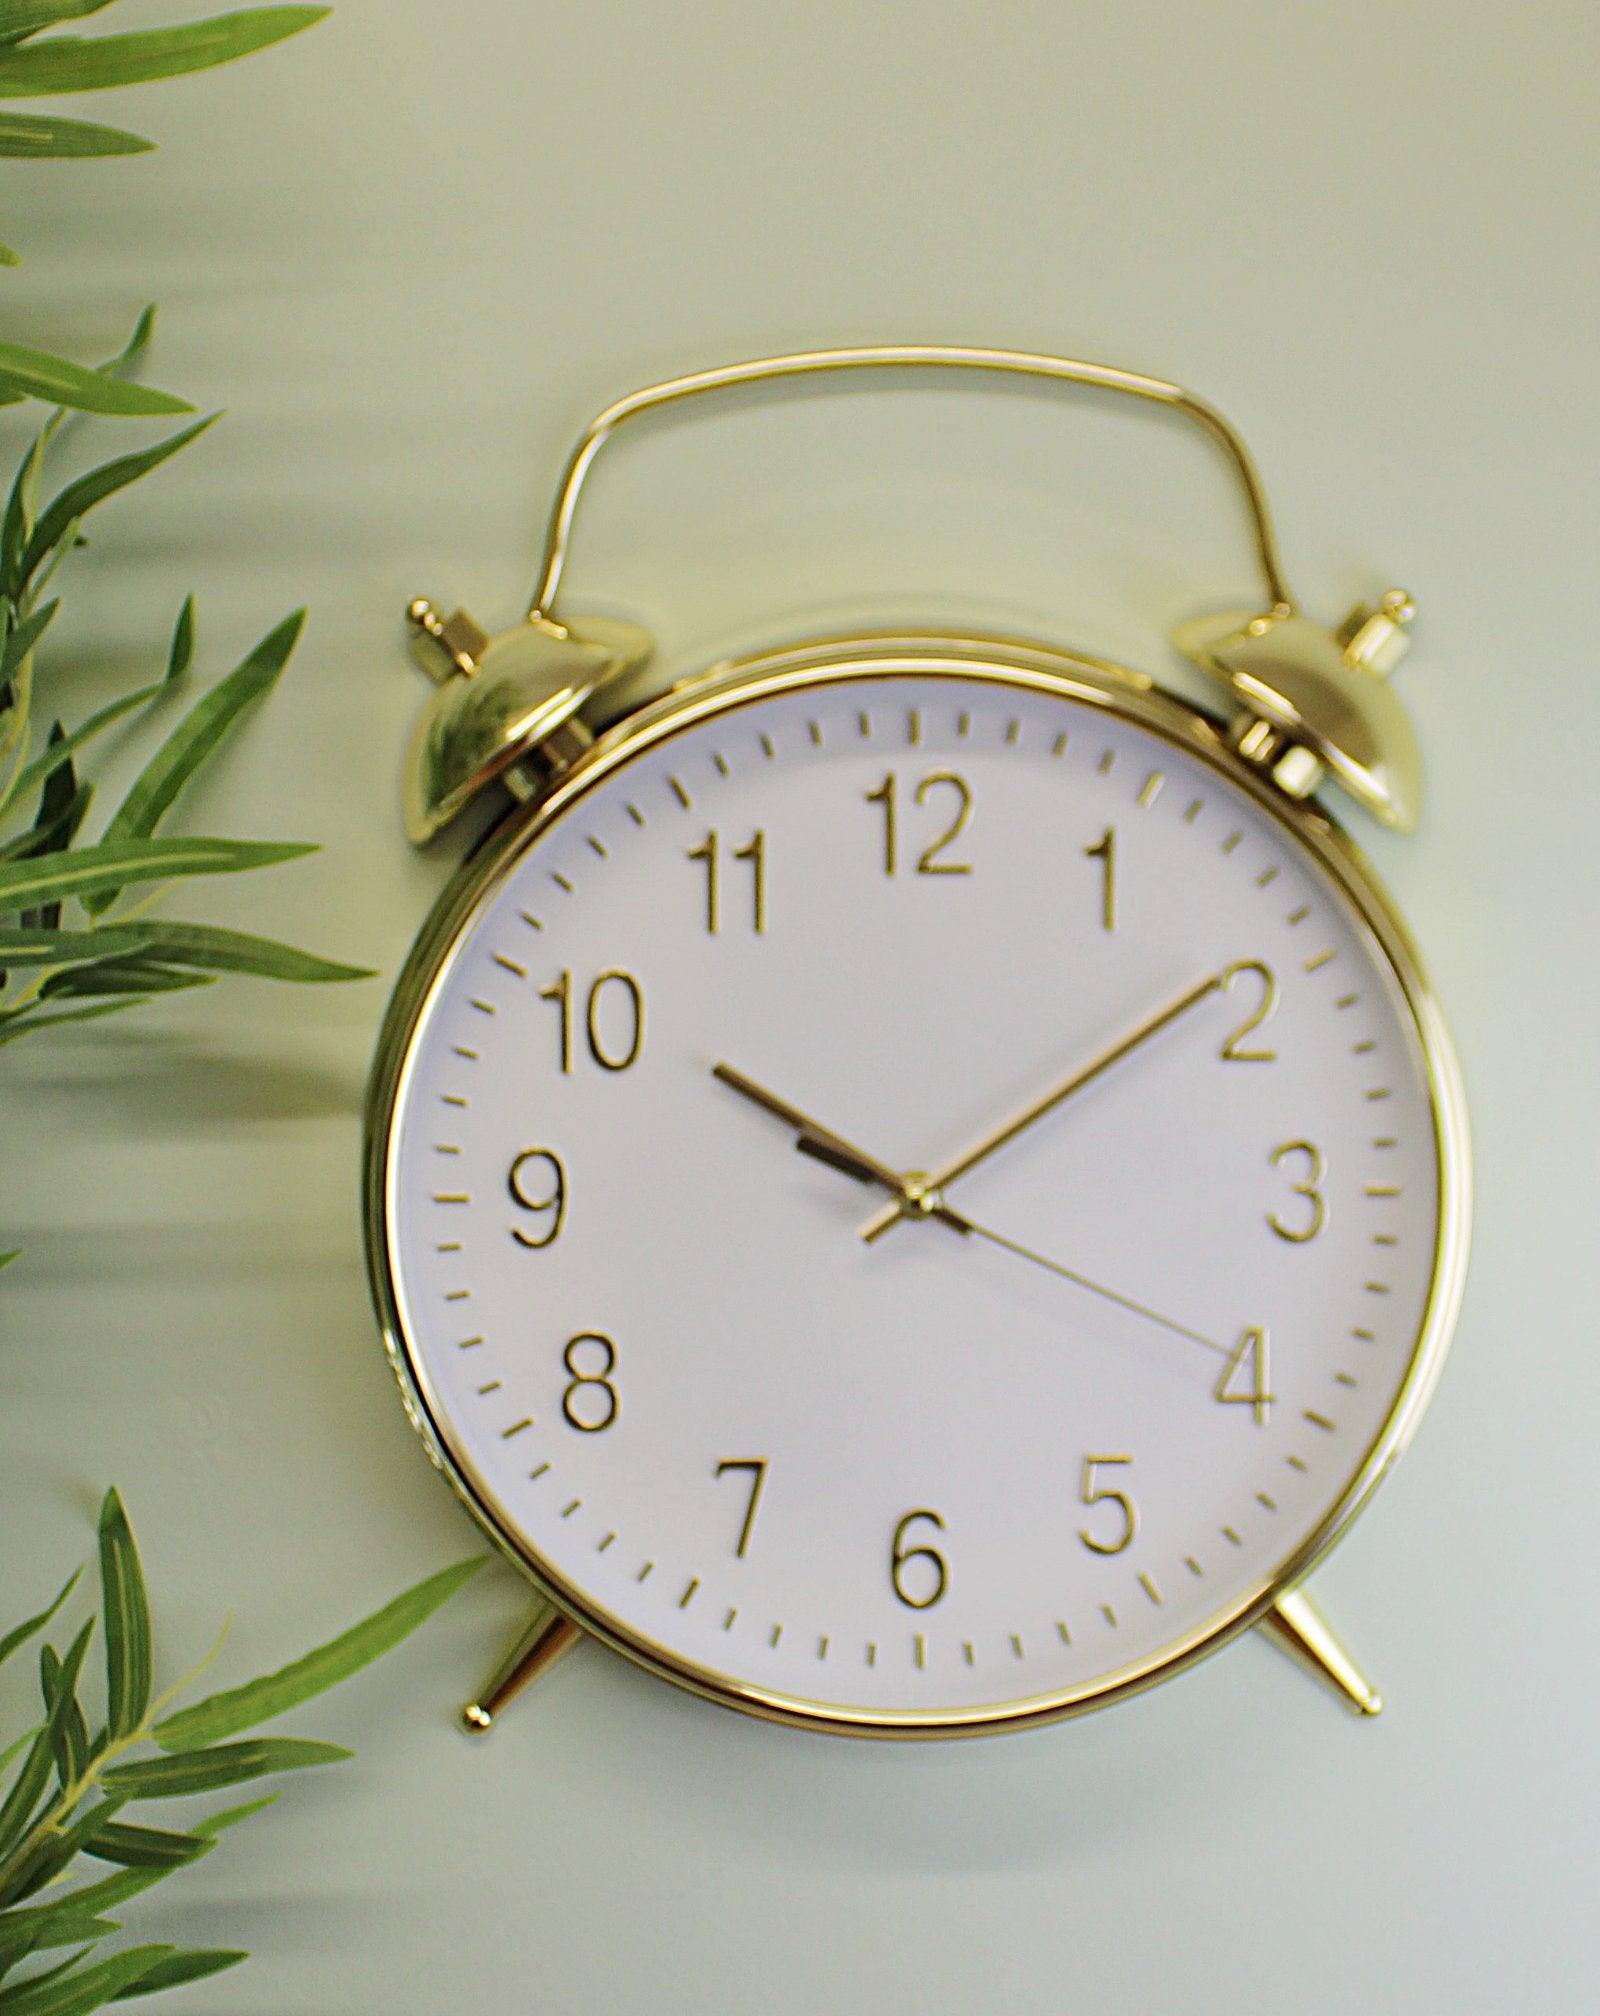 View Alarm Style Gold White Wall Clock information